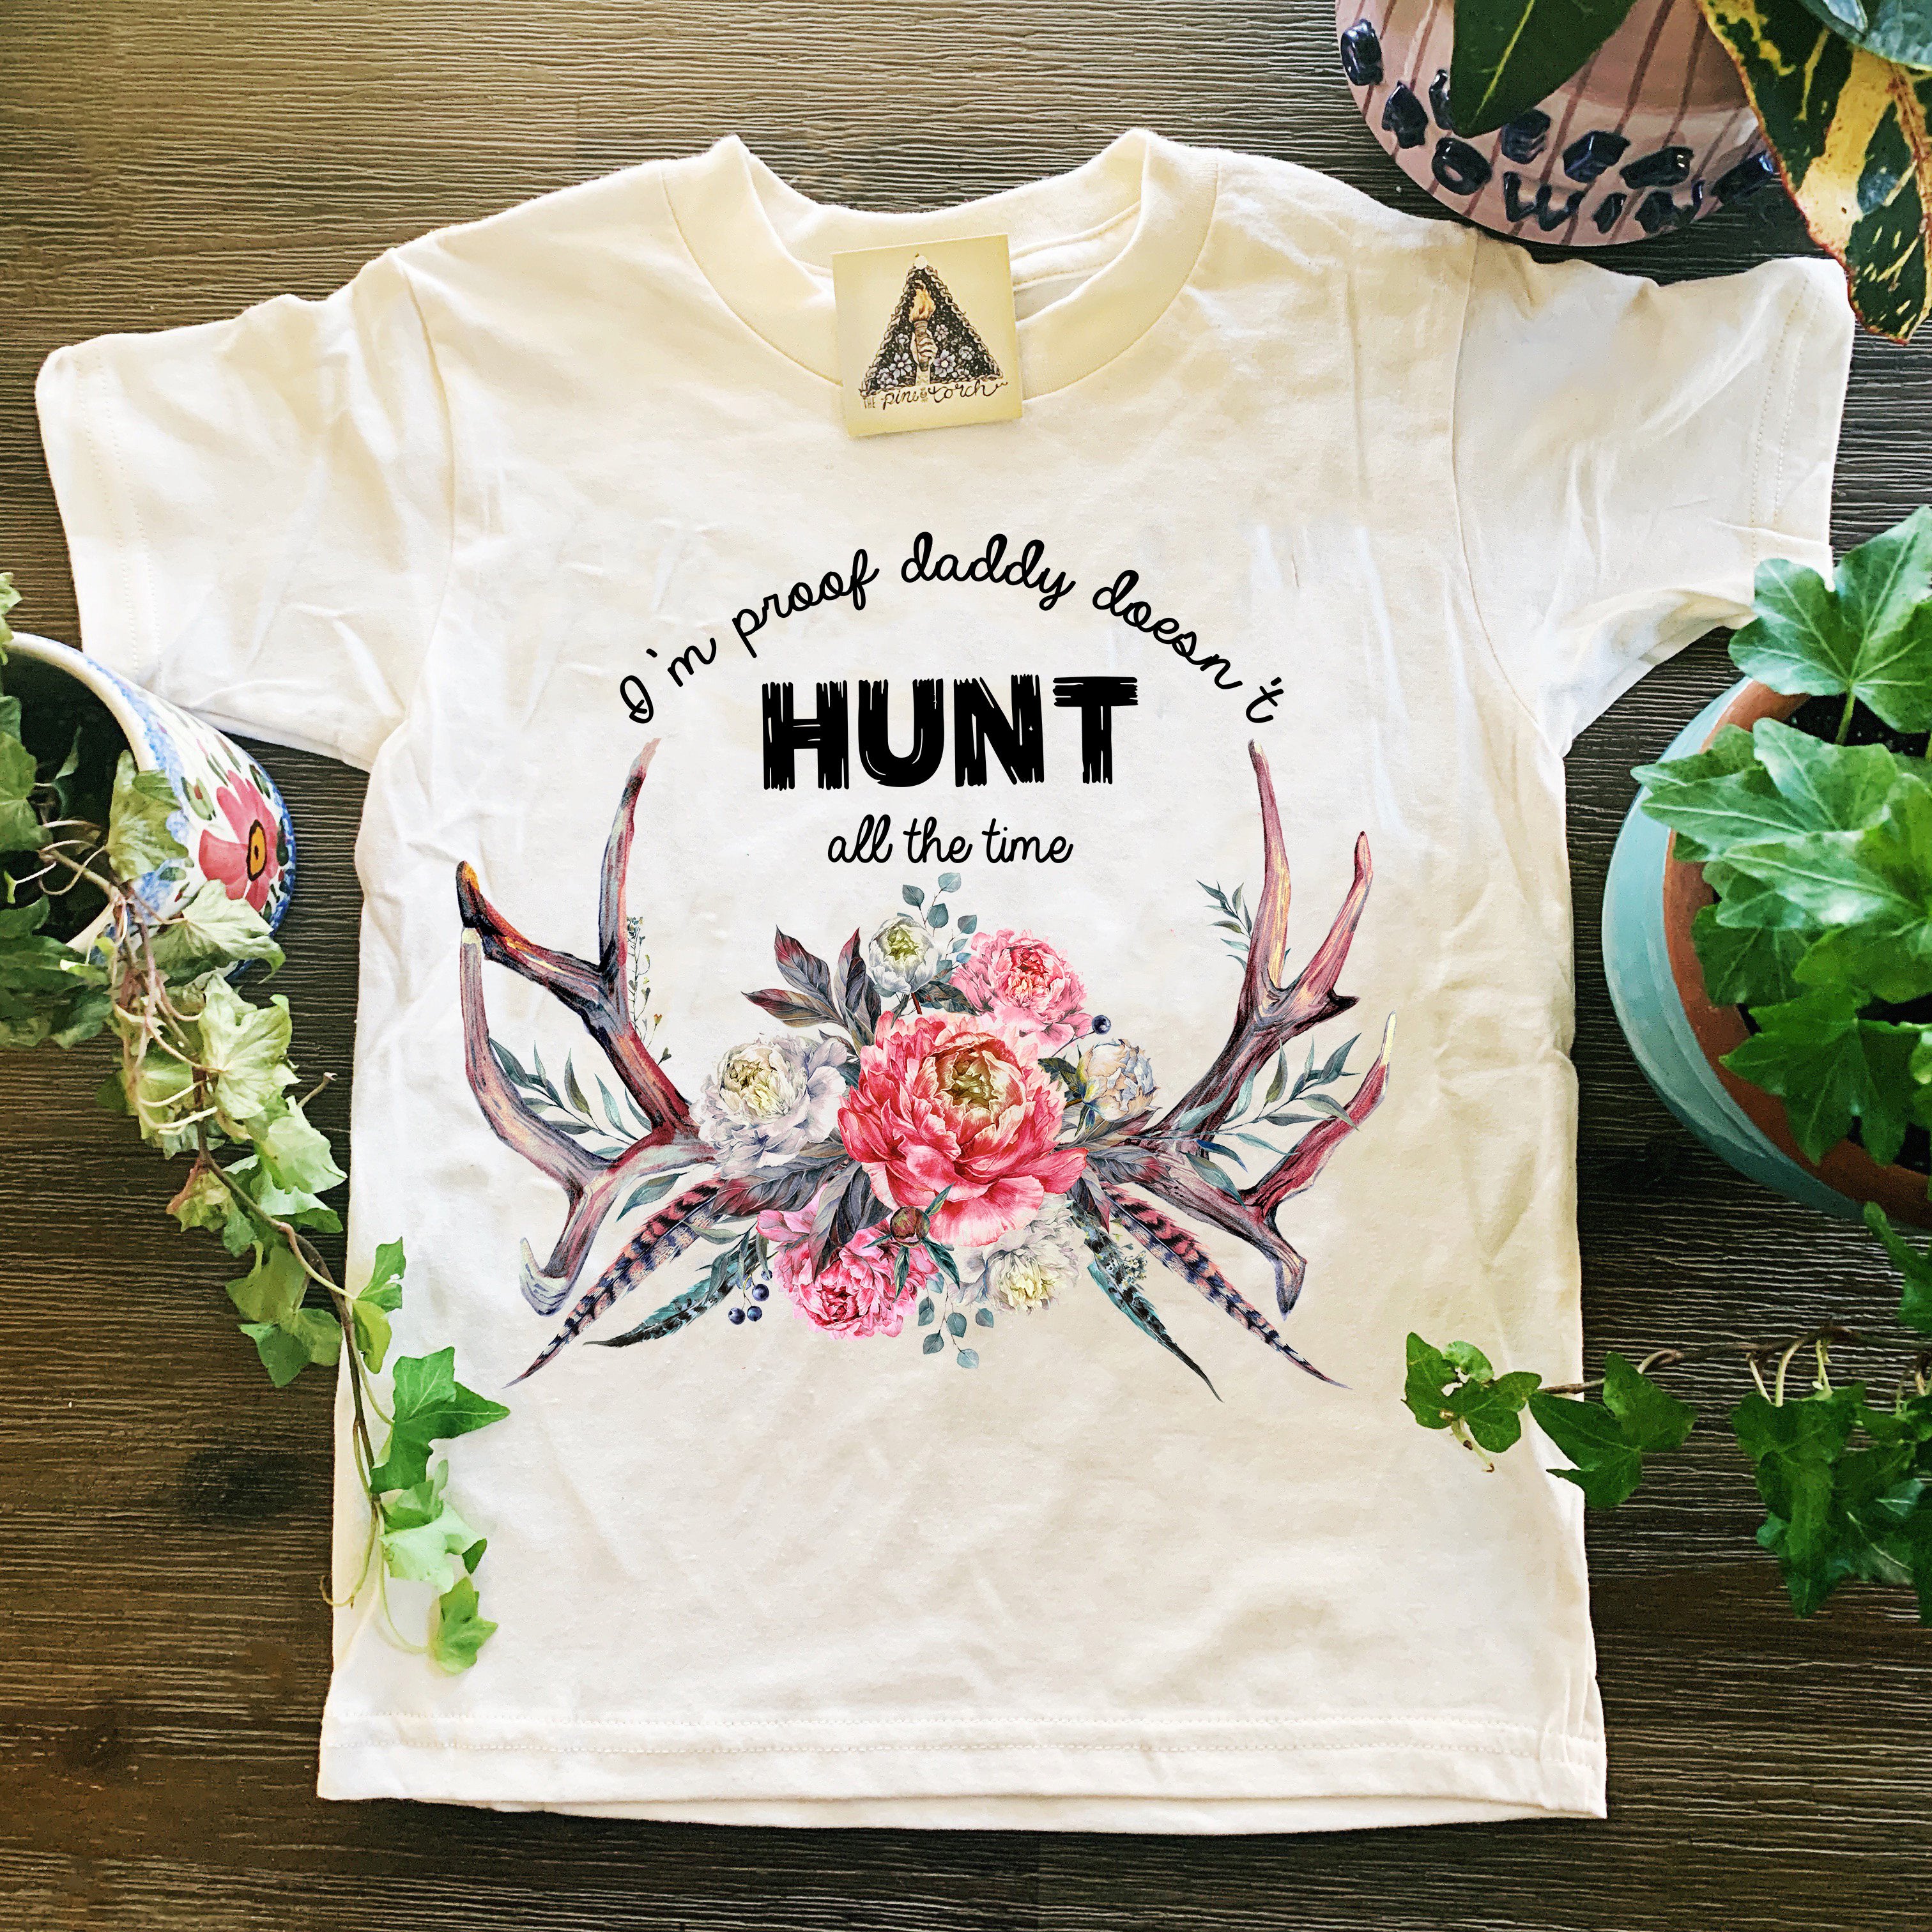 « I'M PROOF DADDY DOESN'T HUNT ALL THE TIME (GIRL) » KID'S TEE